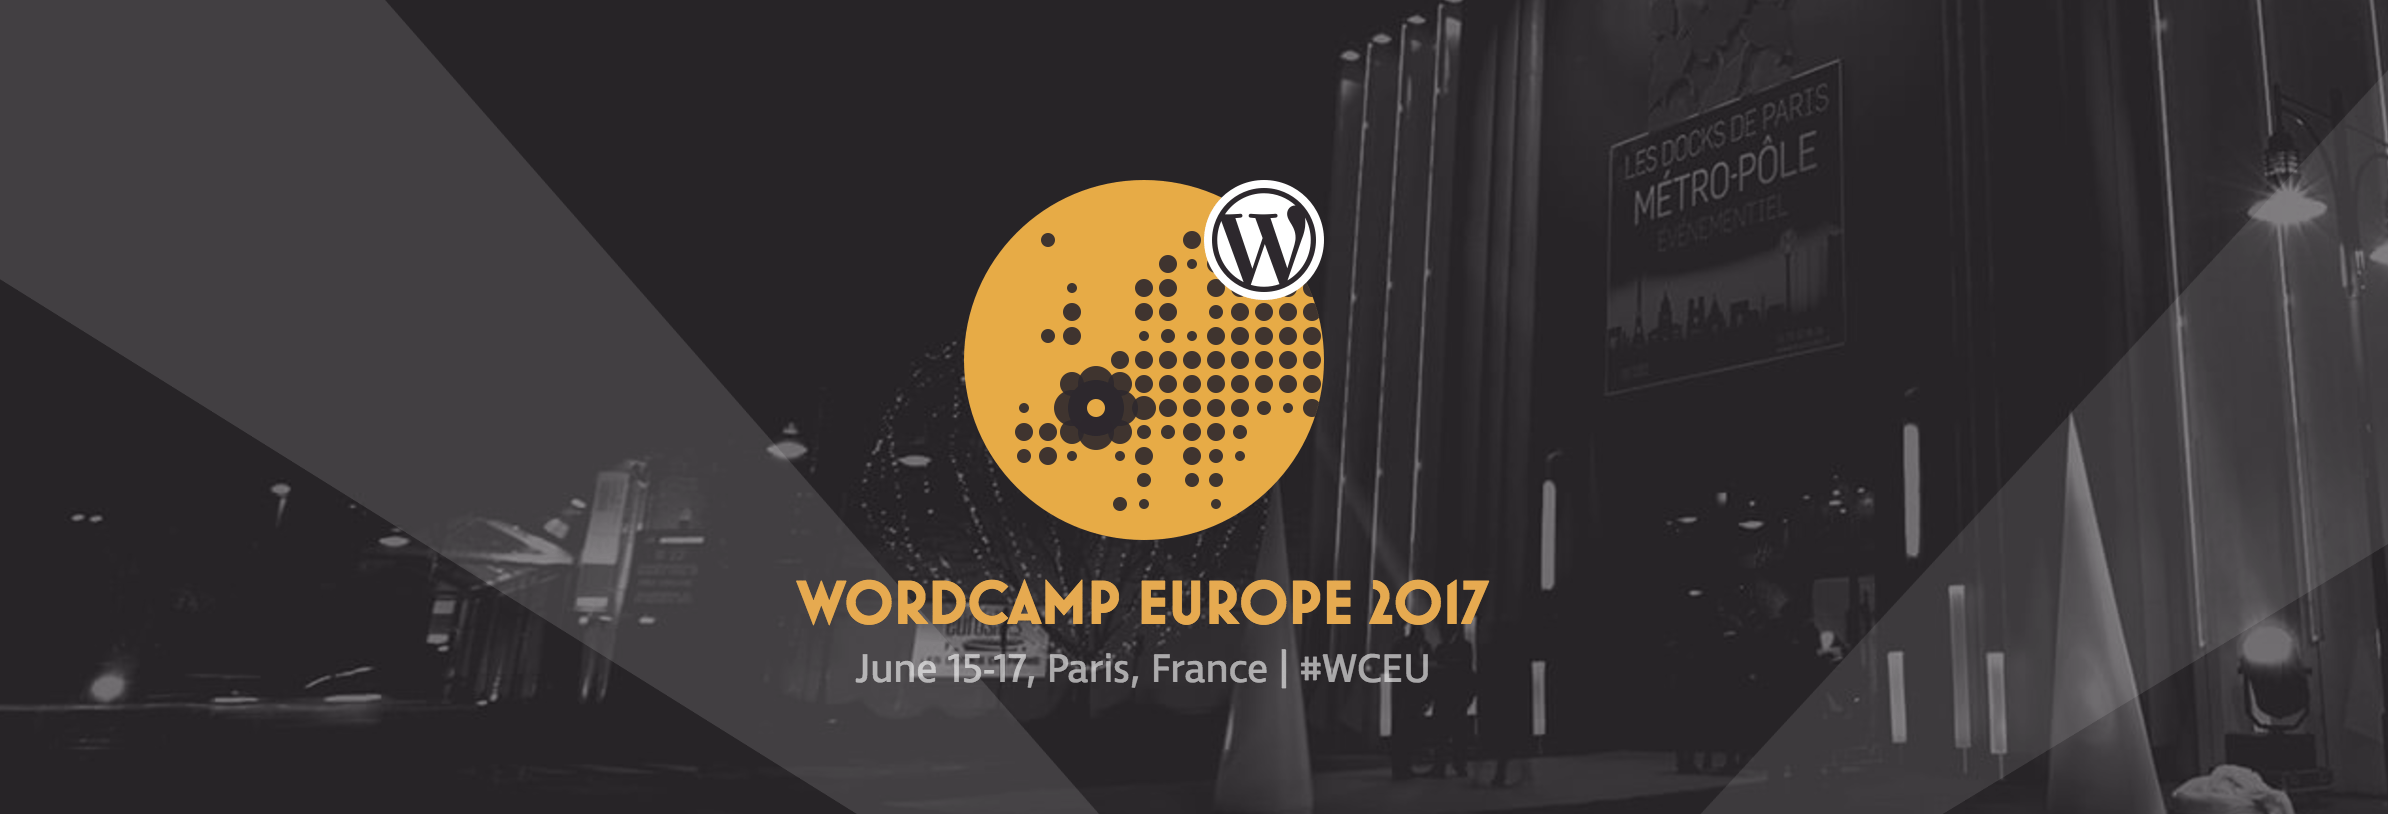 EVERYTHING YOU NEED TO KNOW ABOUT WORDCAMP EUROPE 2017